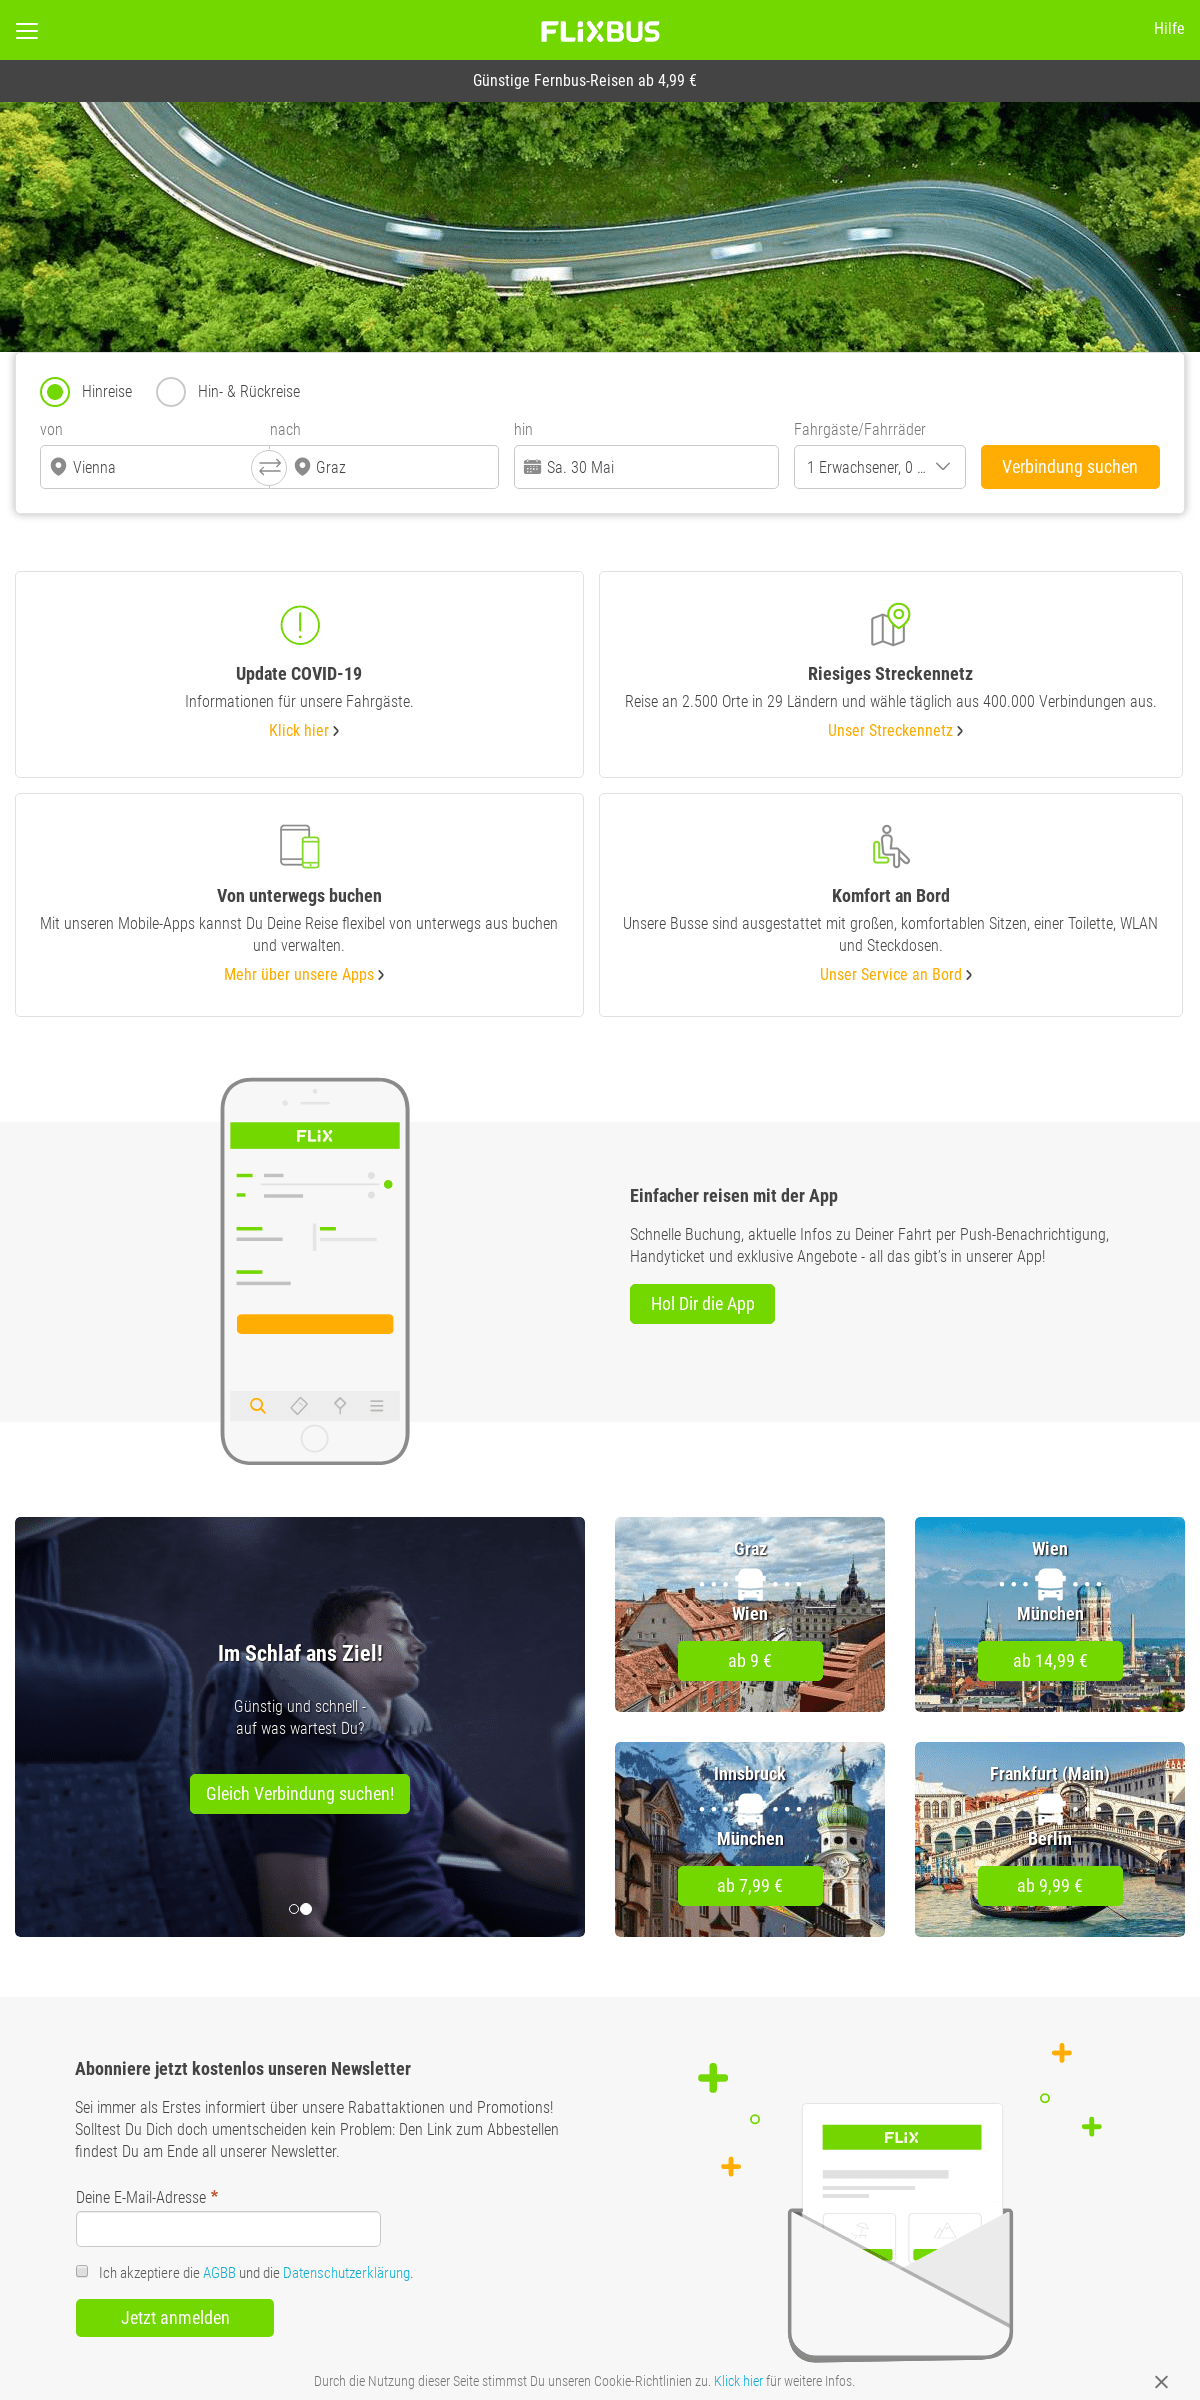 A complete backup of flixbus.at